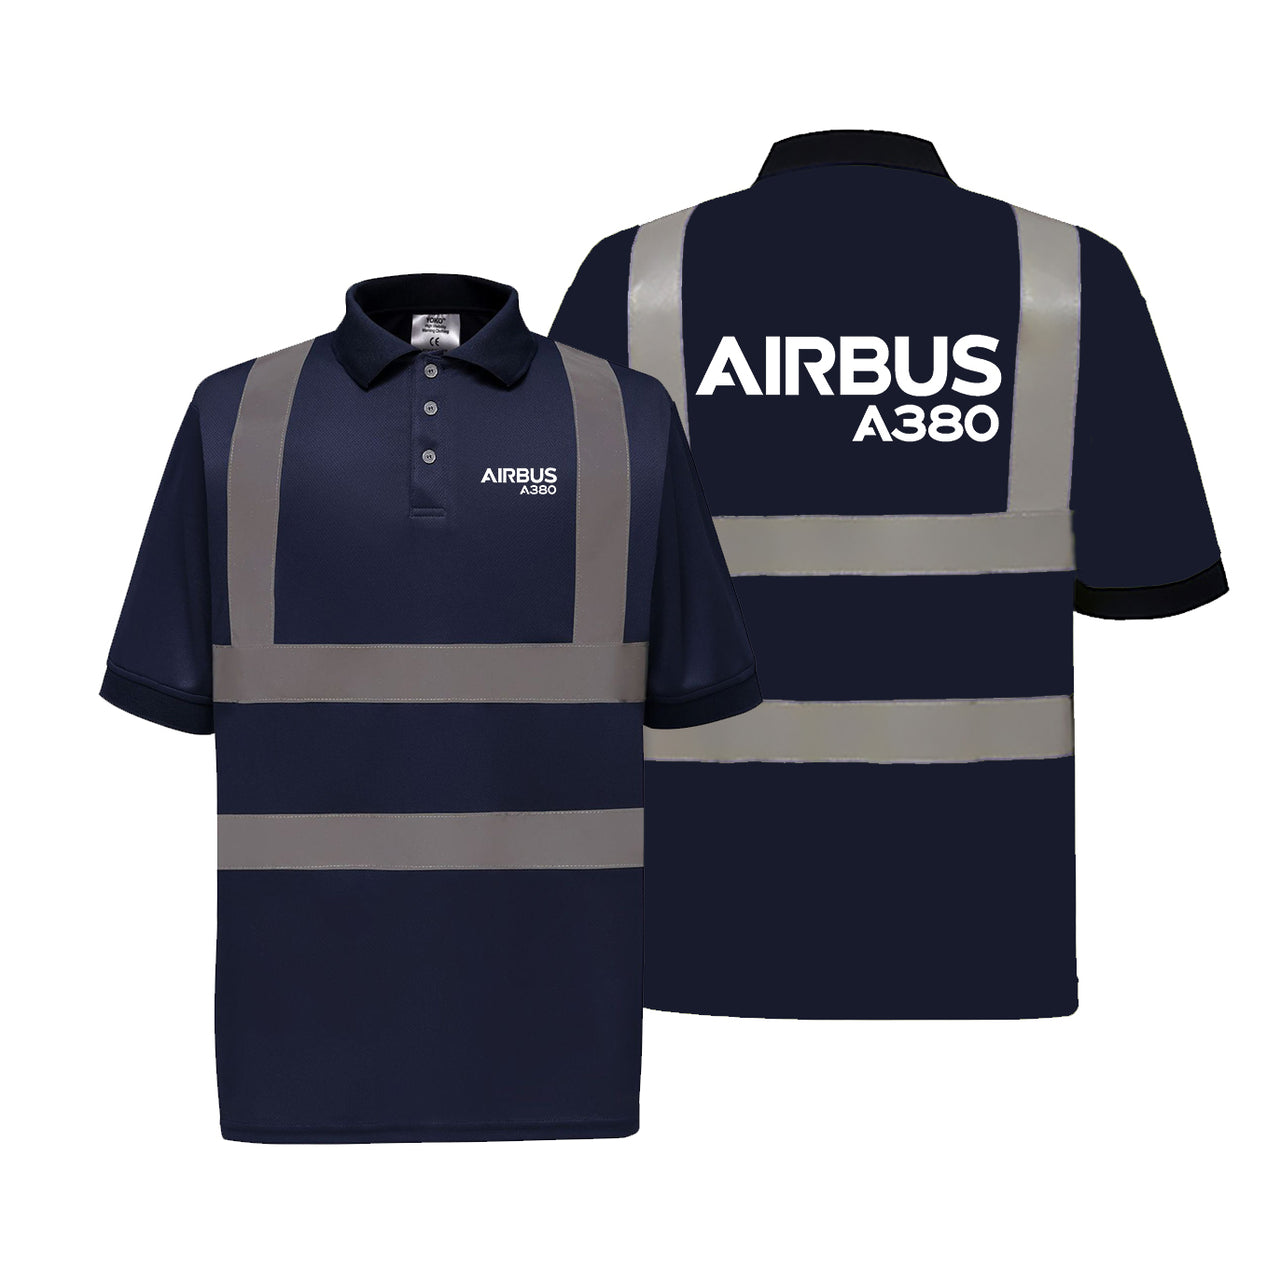 Airbus A380 & Text Designed Reflective Polo T-Shirts